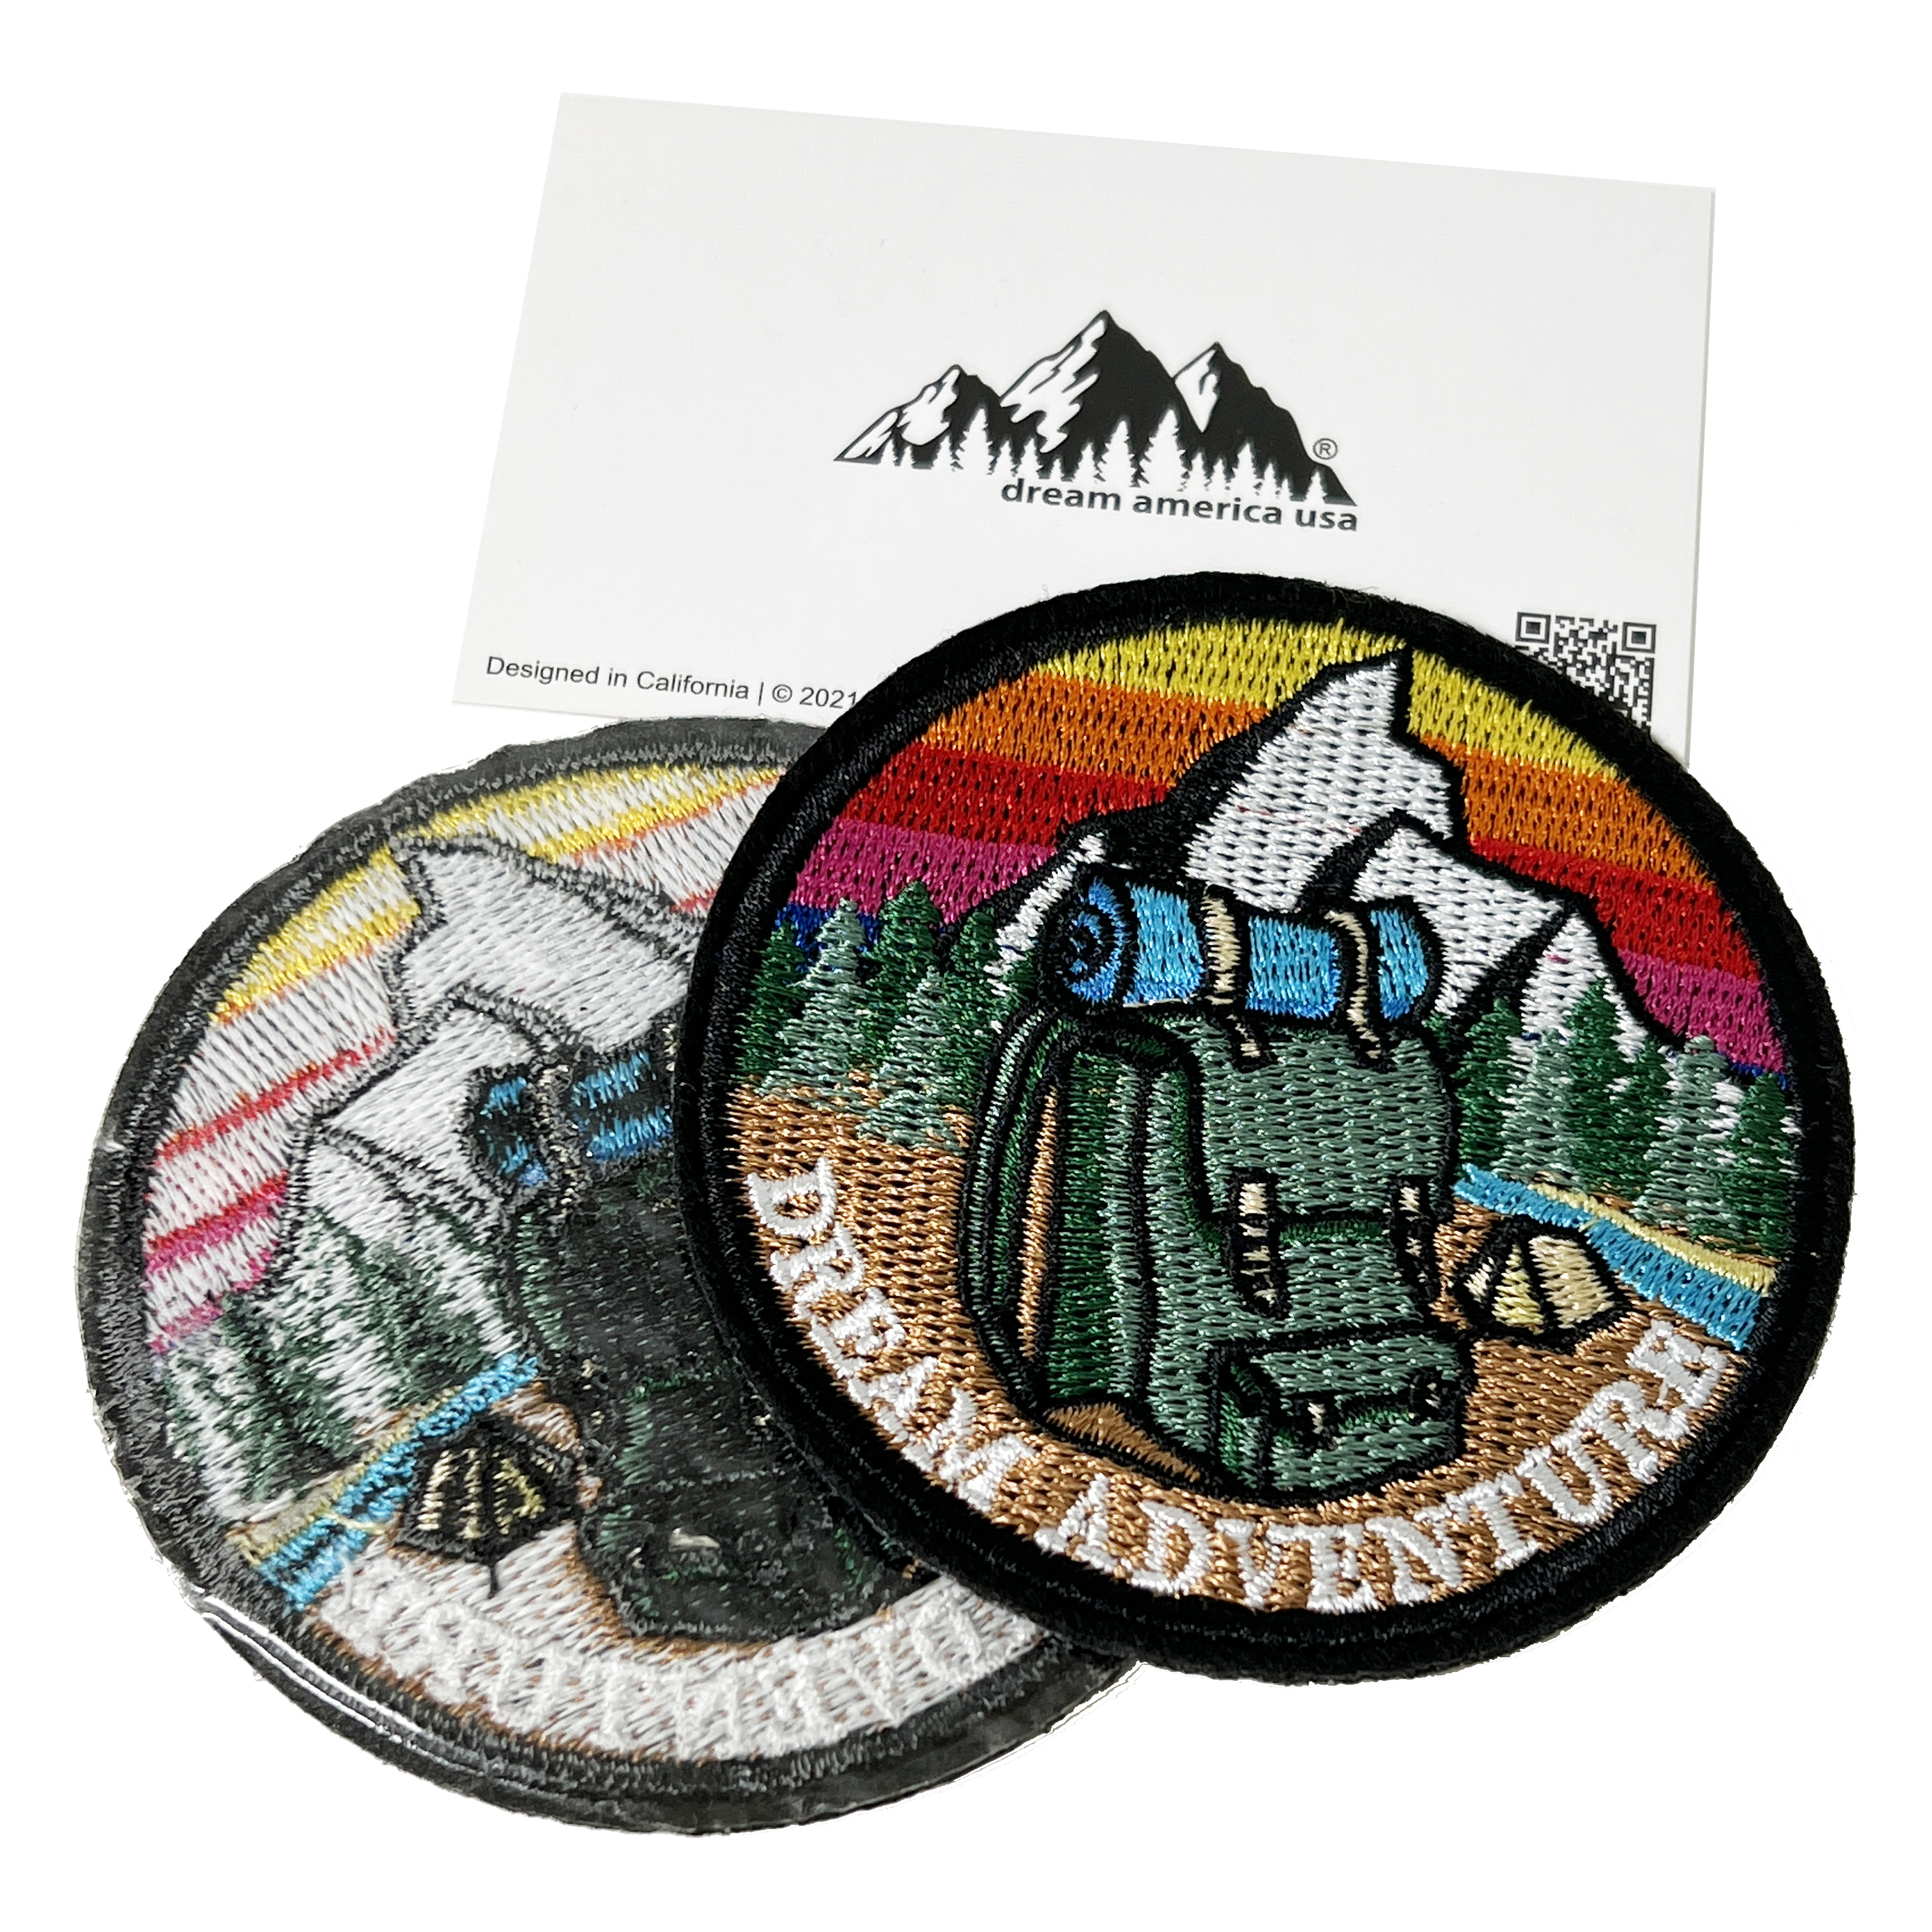 https://cdn11.bigcommerce.com/s-yph4picvn2/images/stencil/original/products/122/474/Adventure_Patch_3__63512.1646505842.jpg